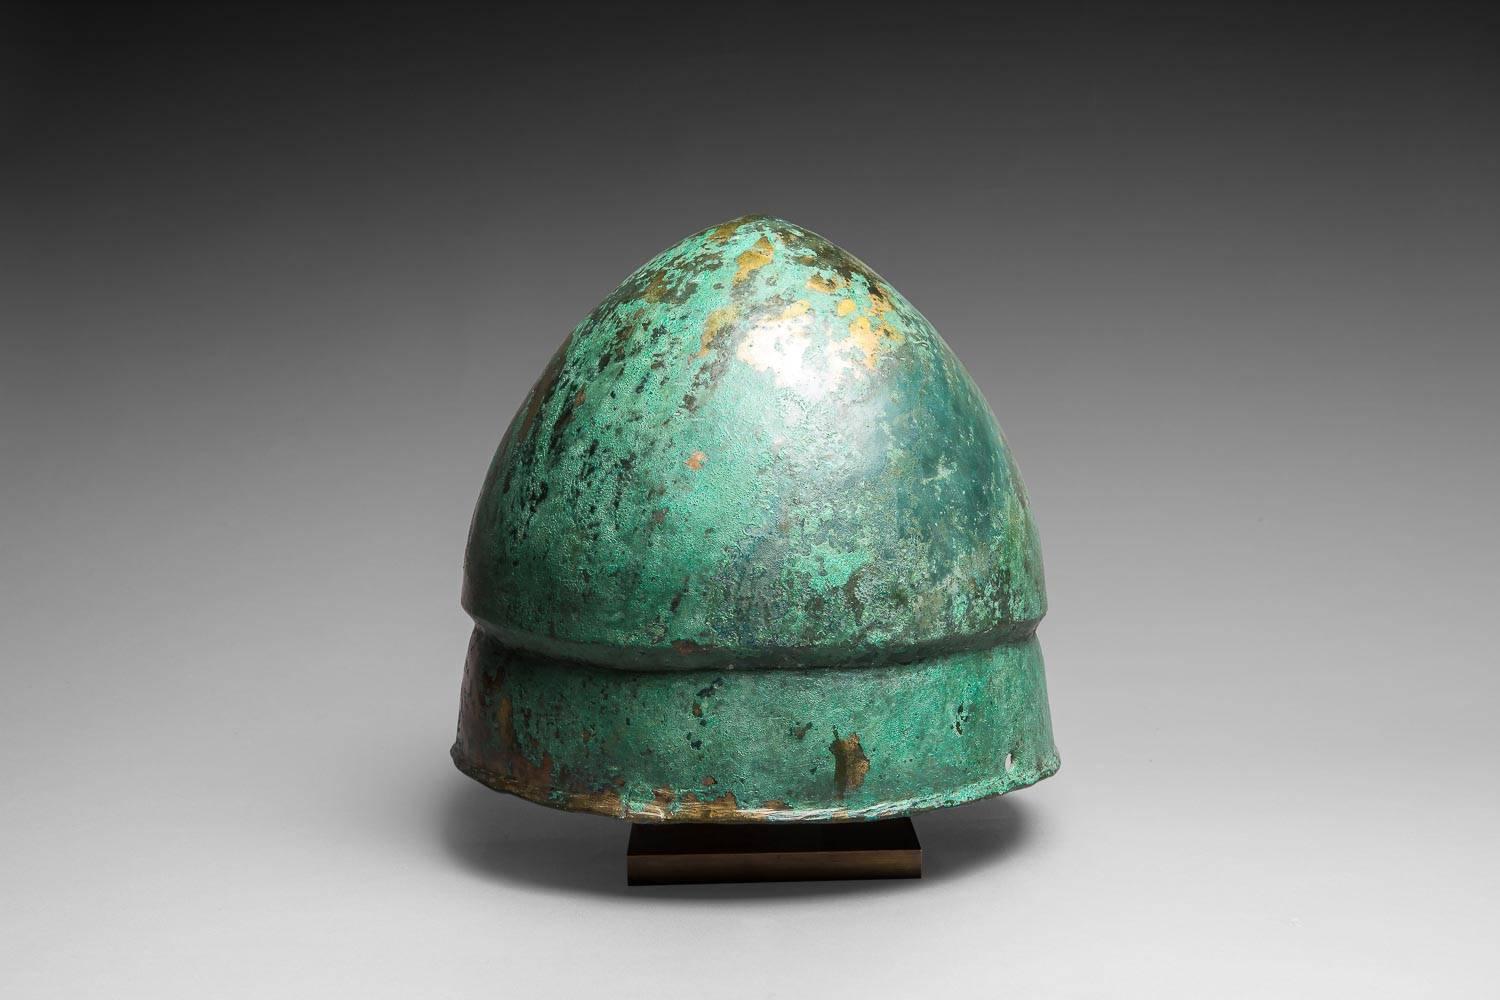 Pilos type helmet
Greek Art, 6th century BC.
Bronze.

Measures: Height: 20.2 cm; Diameter: 22 cm.

Provenance : Private collection of Mr. G.G., Paris, acquired in 2006;
Sale Hermann Historica 2006;
Former Belgian collection before